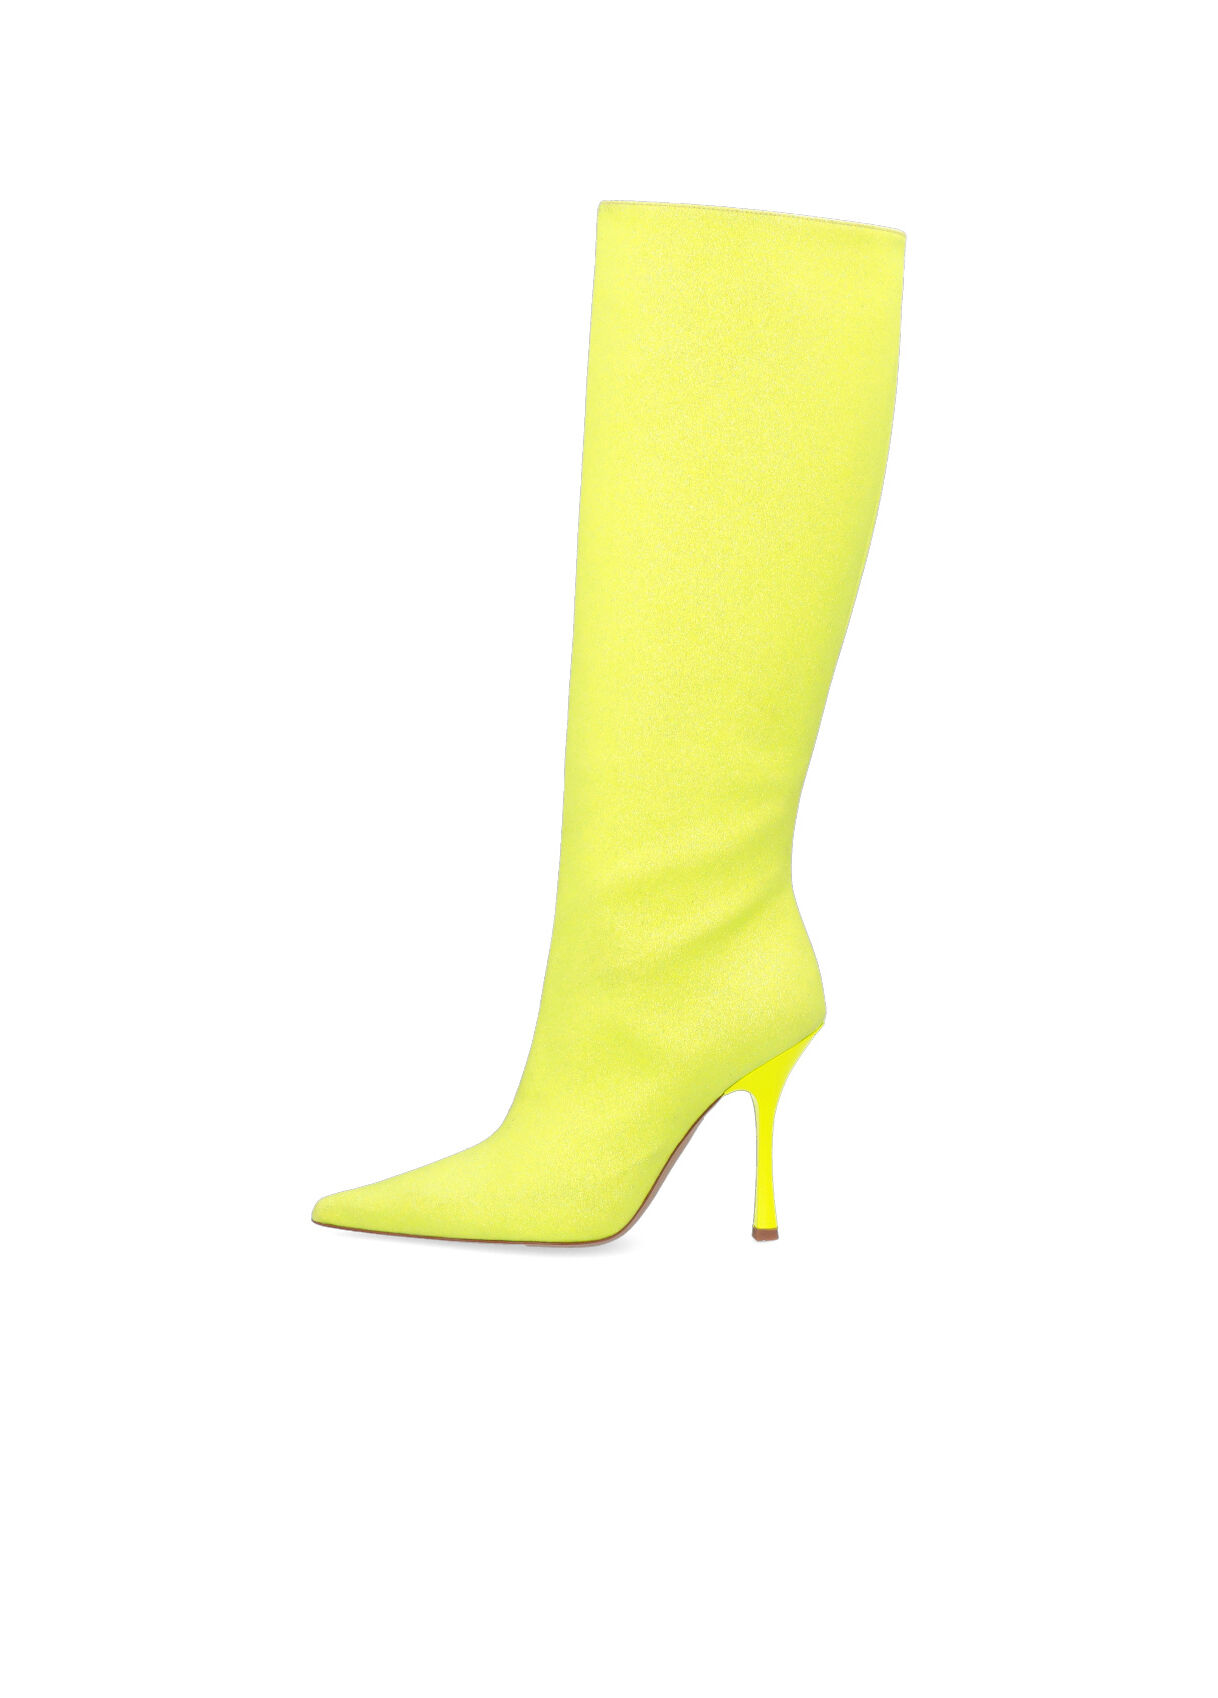 Kita Yellow Boots - Shop Women's Ankle Boots Online – EDGABILITY